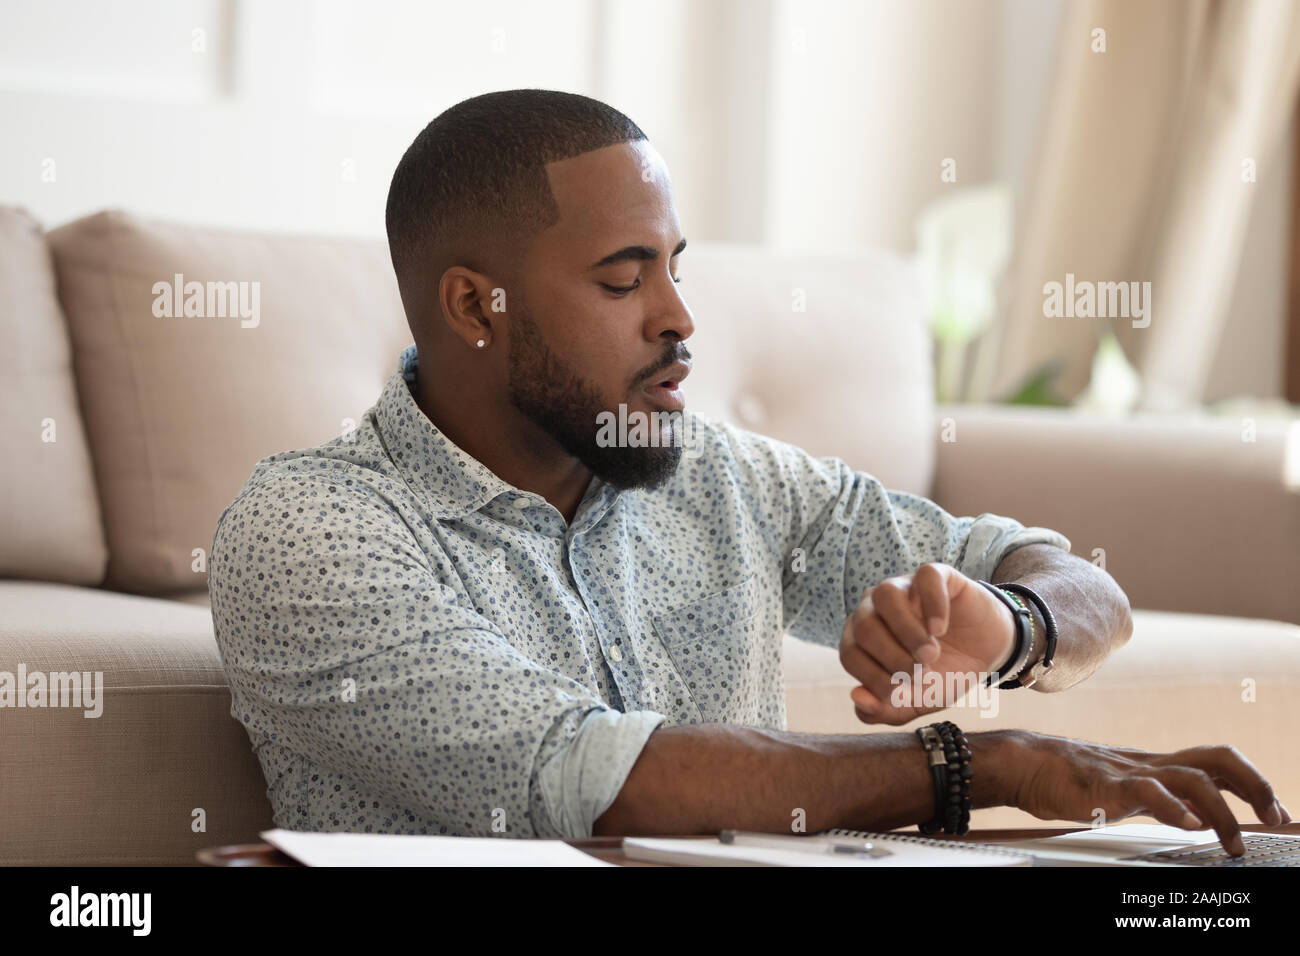 Inquiets African American male check time working on laptop Banque D'Images